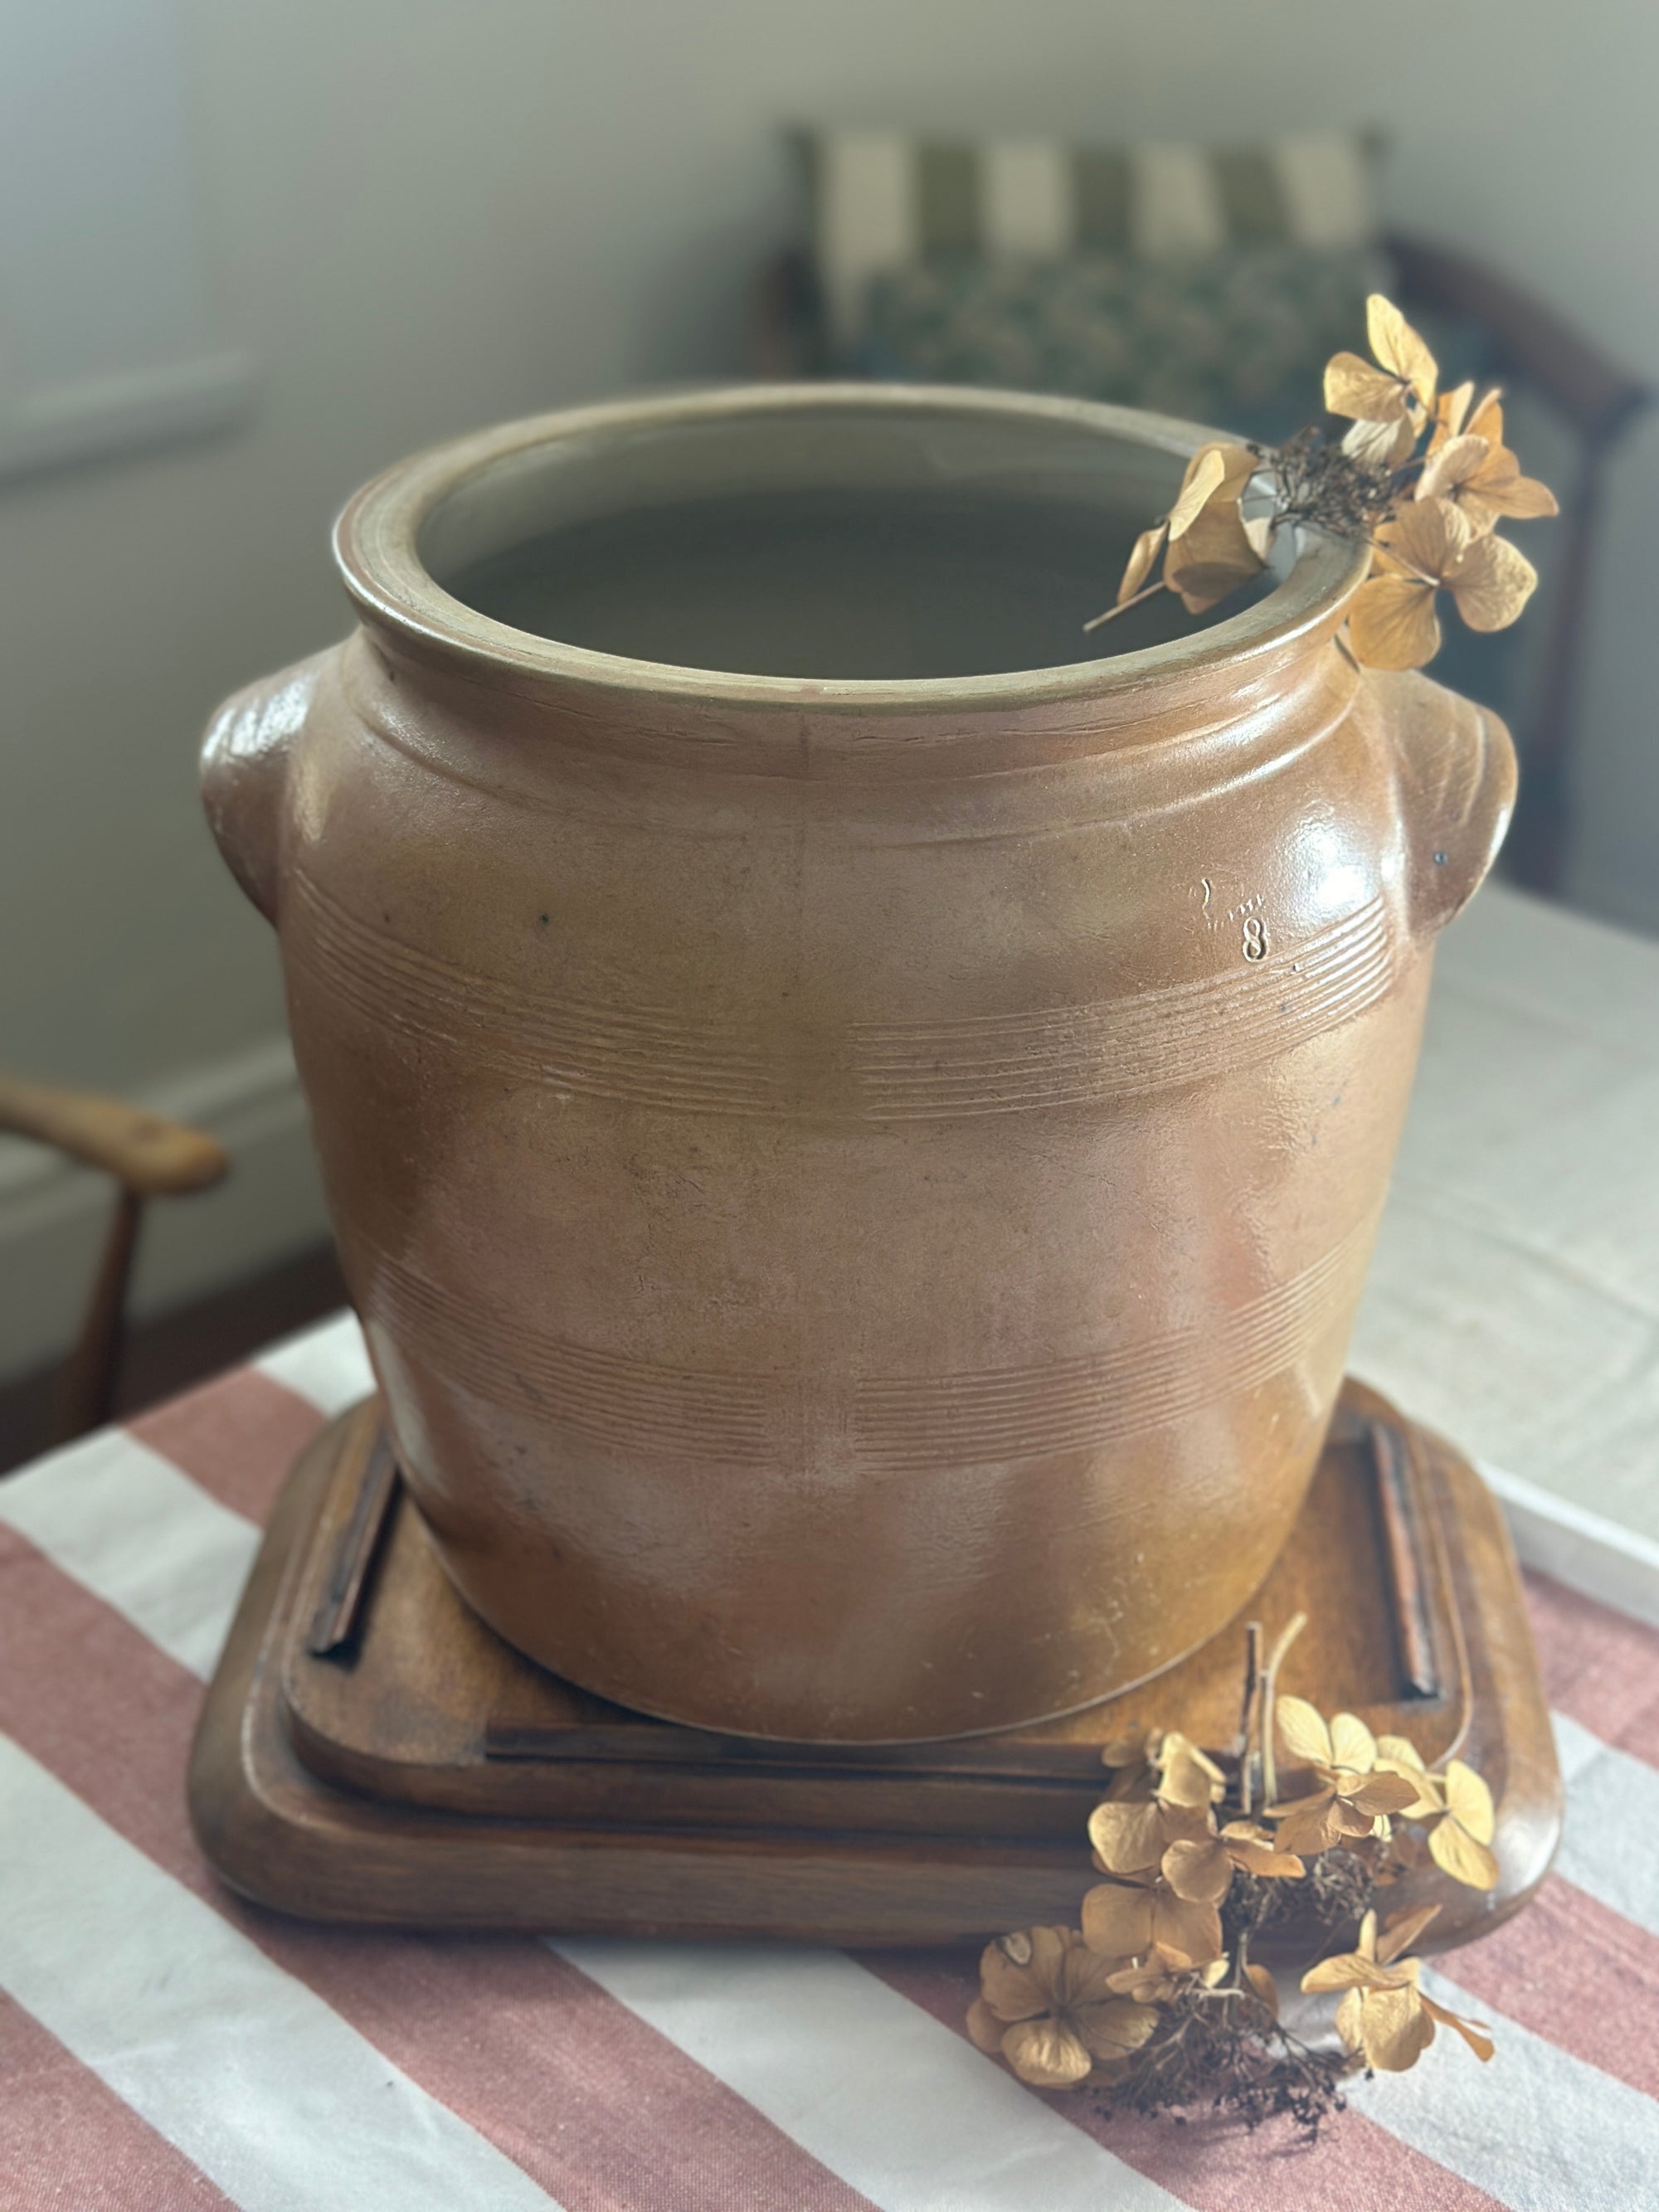 Large brown two handled French confit pot